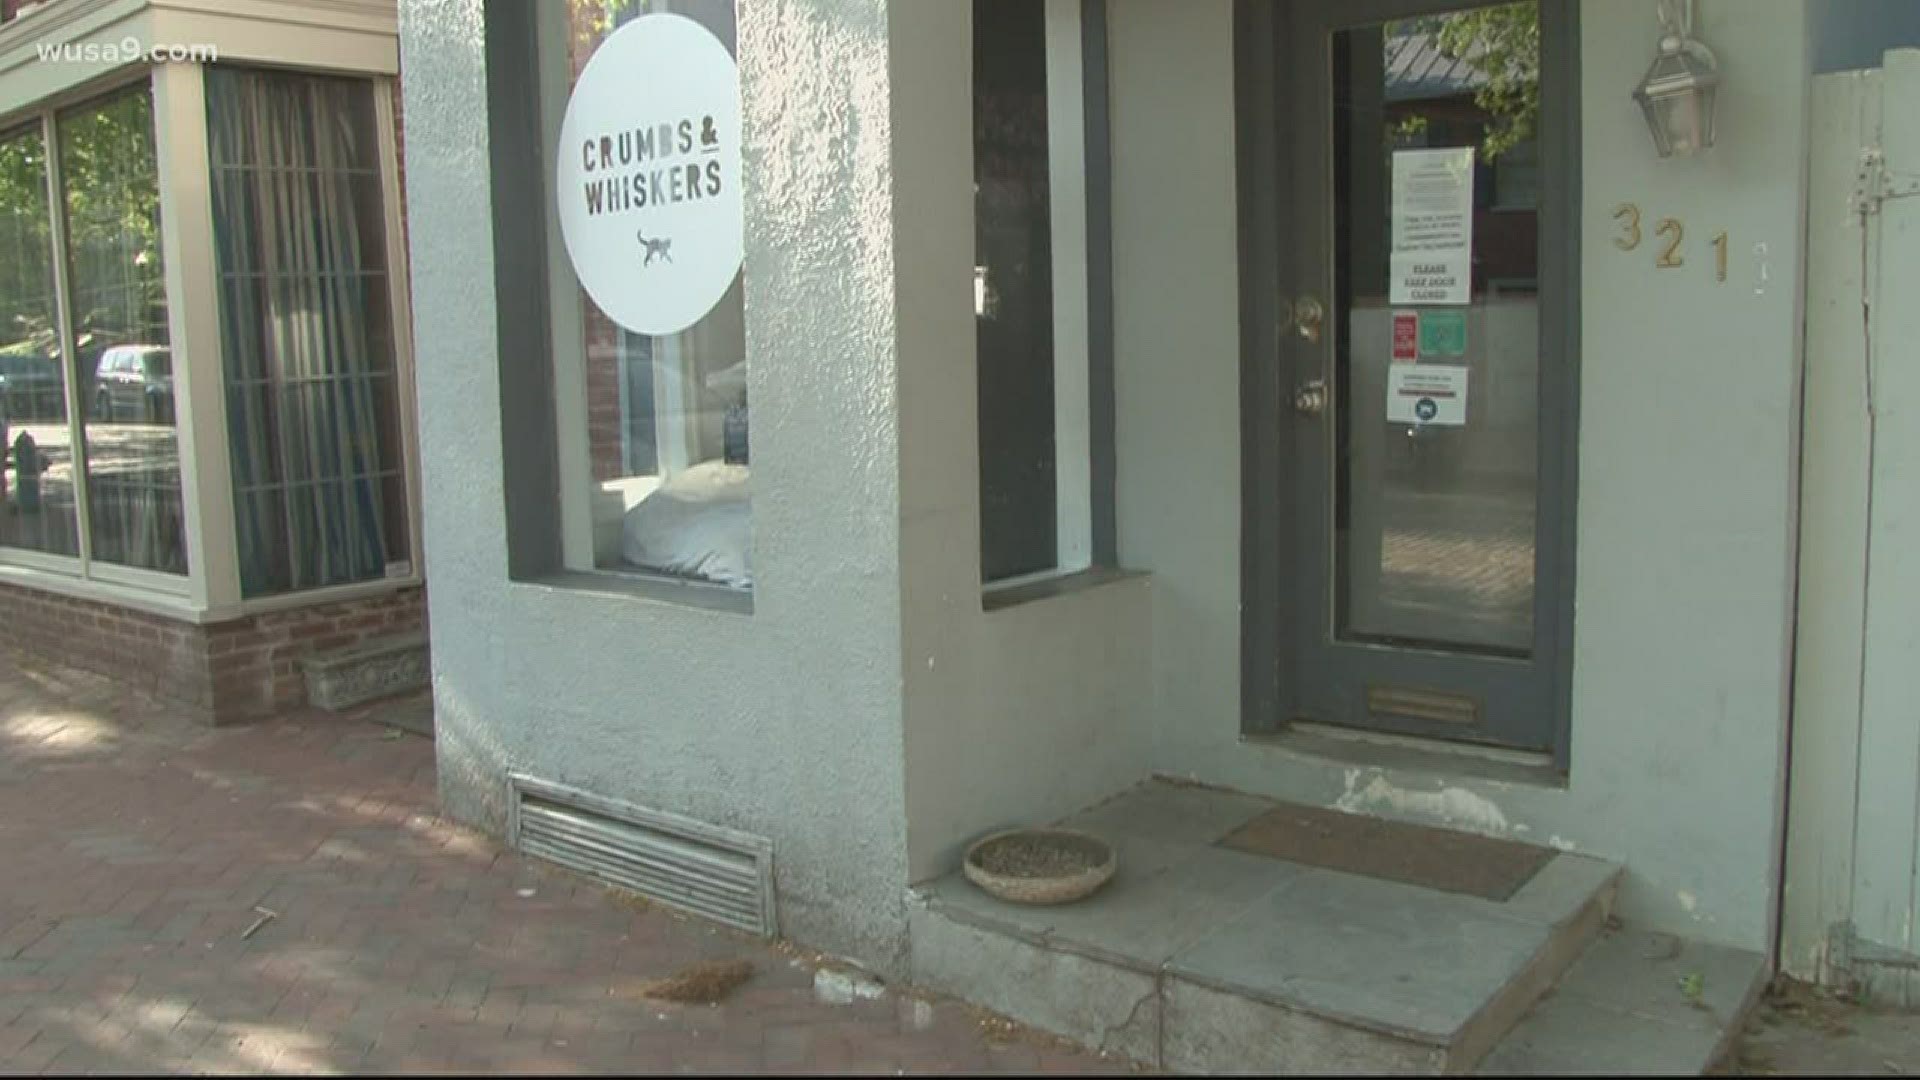 Like many small businesses around the U.S., the owner of Crumbs & Whiskers is struggling to keep all three locations open. The cat lounge on O St. may be gone soon.